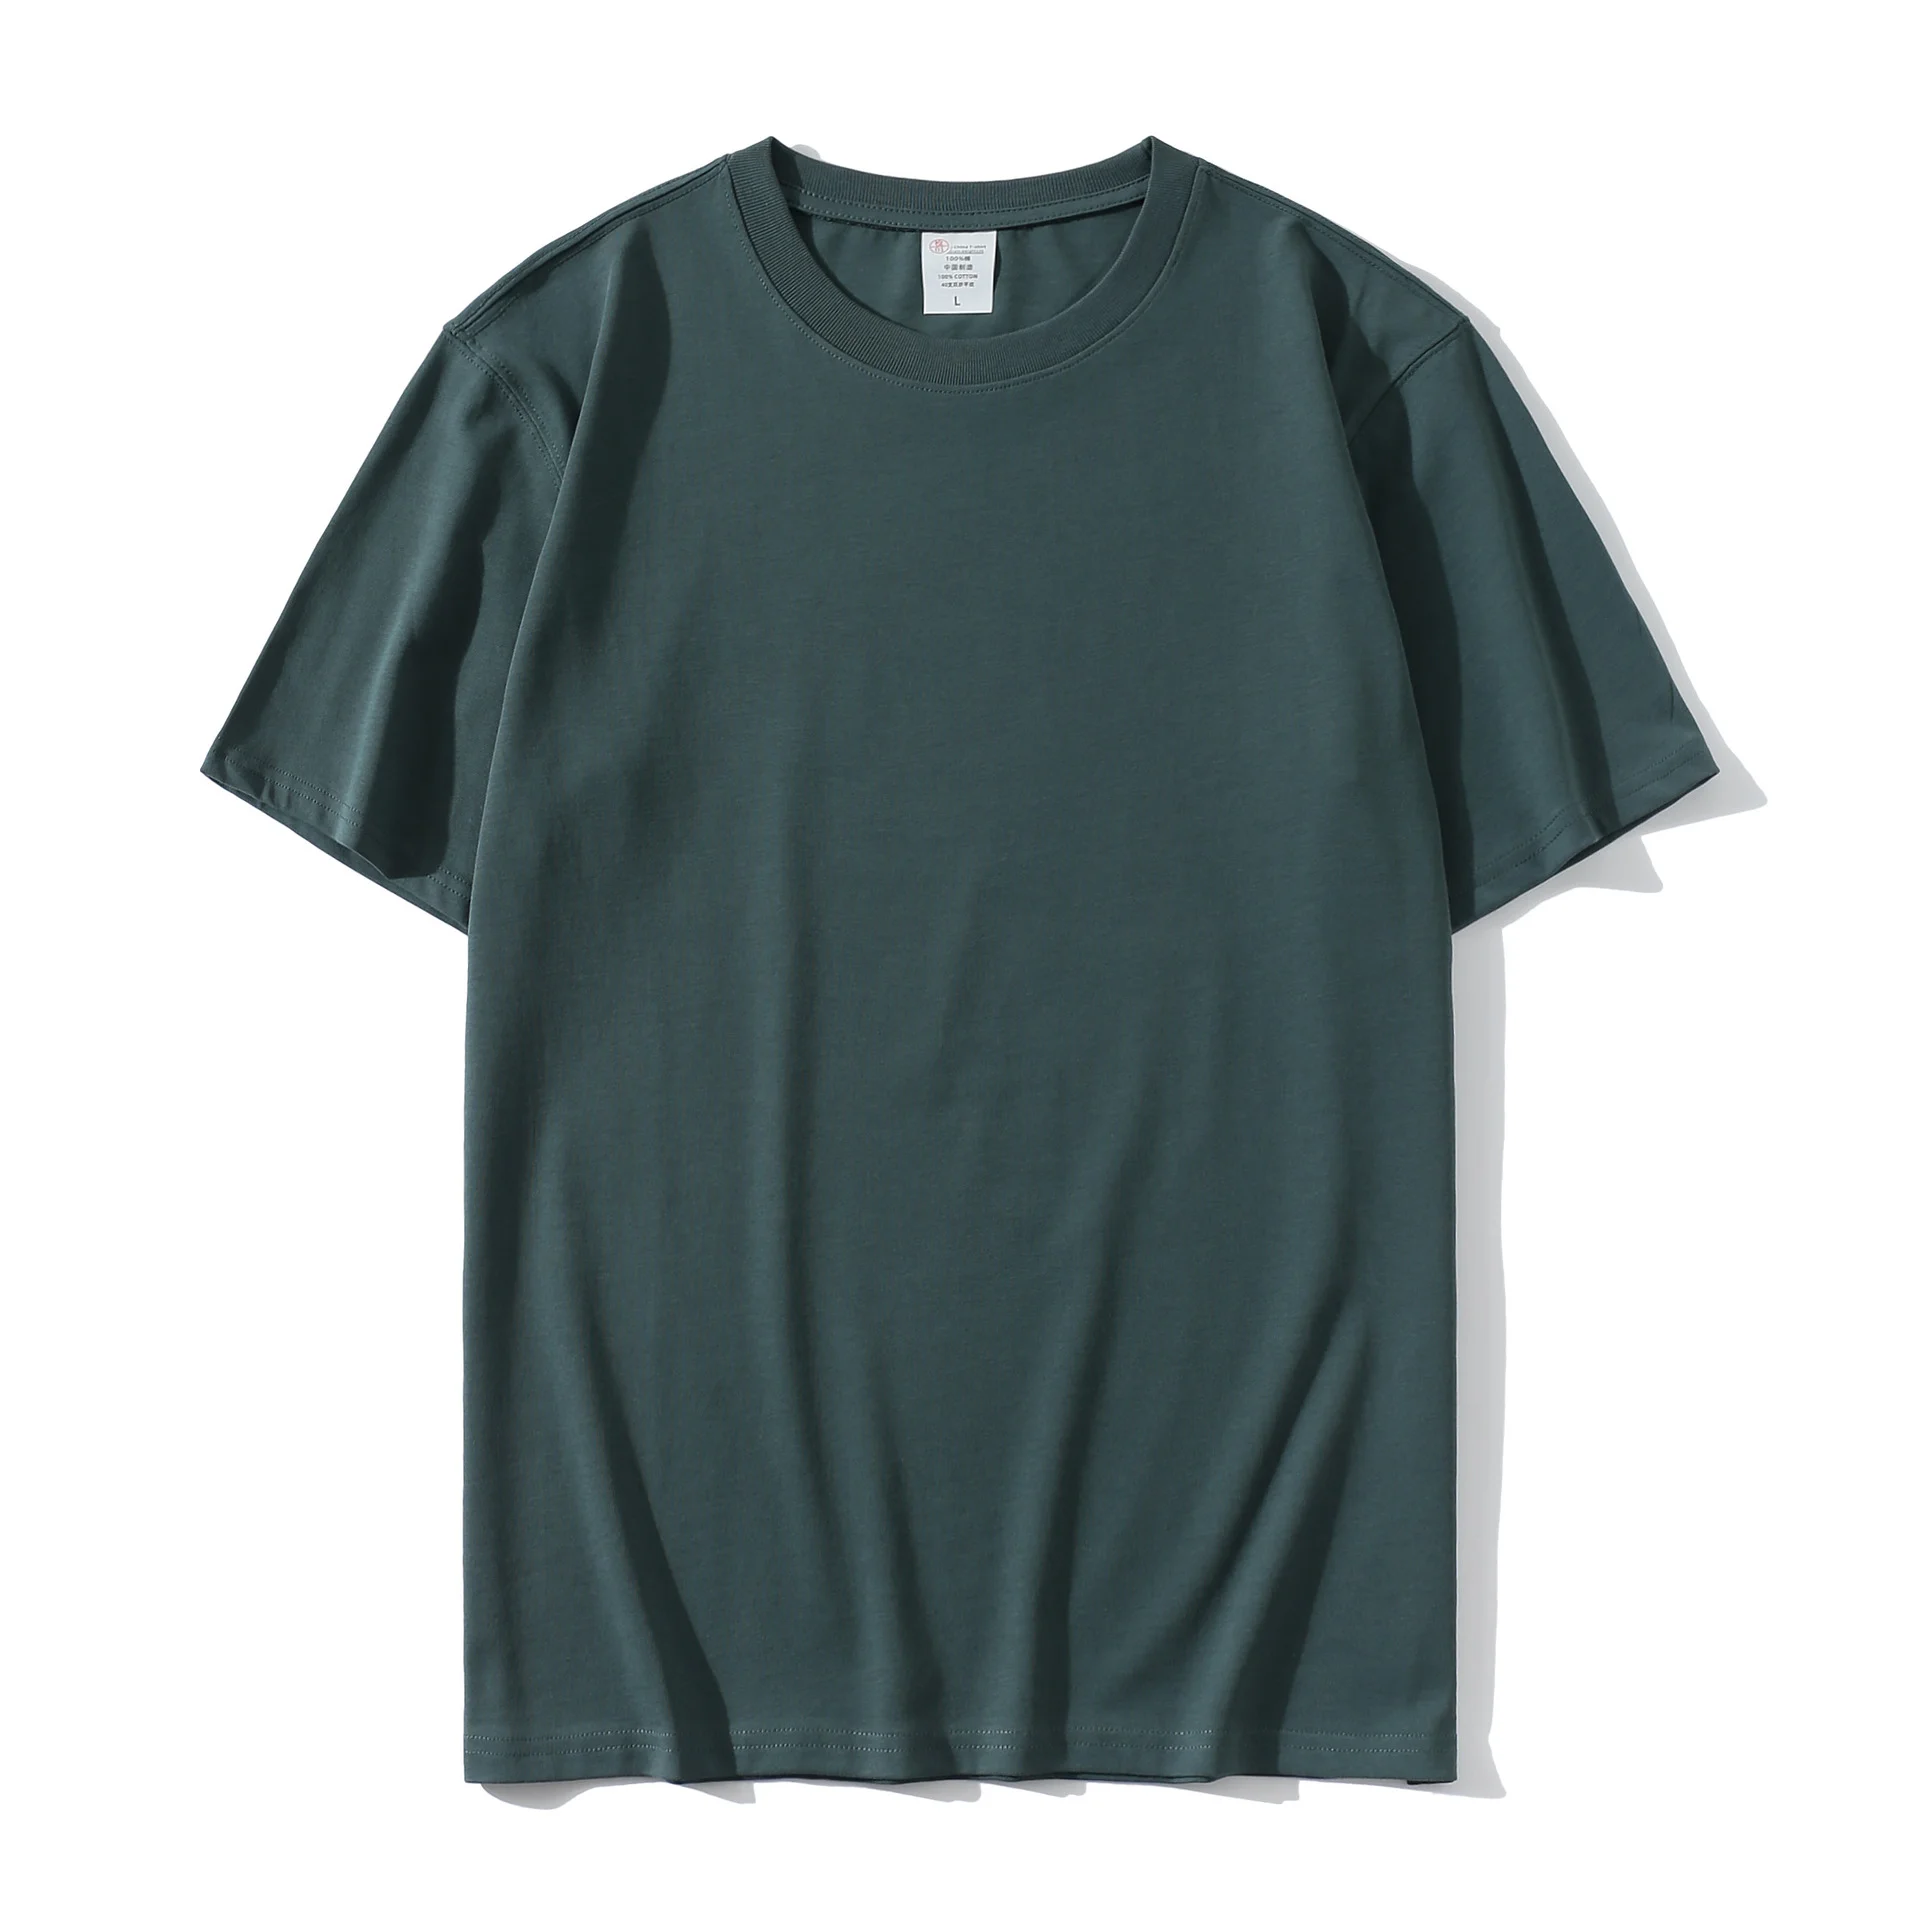 Wholesale Blank T shirts for Printing in Costa Mesa